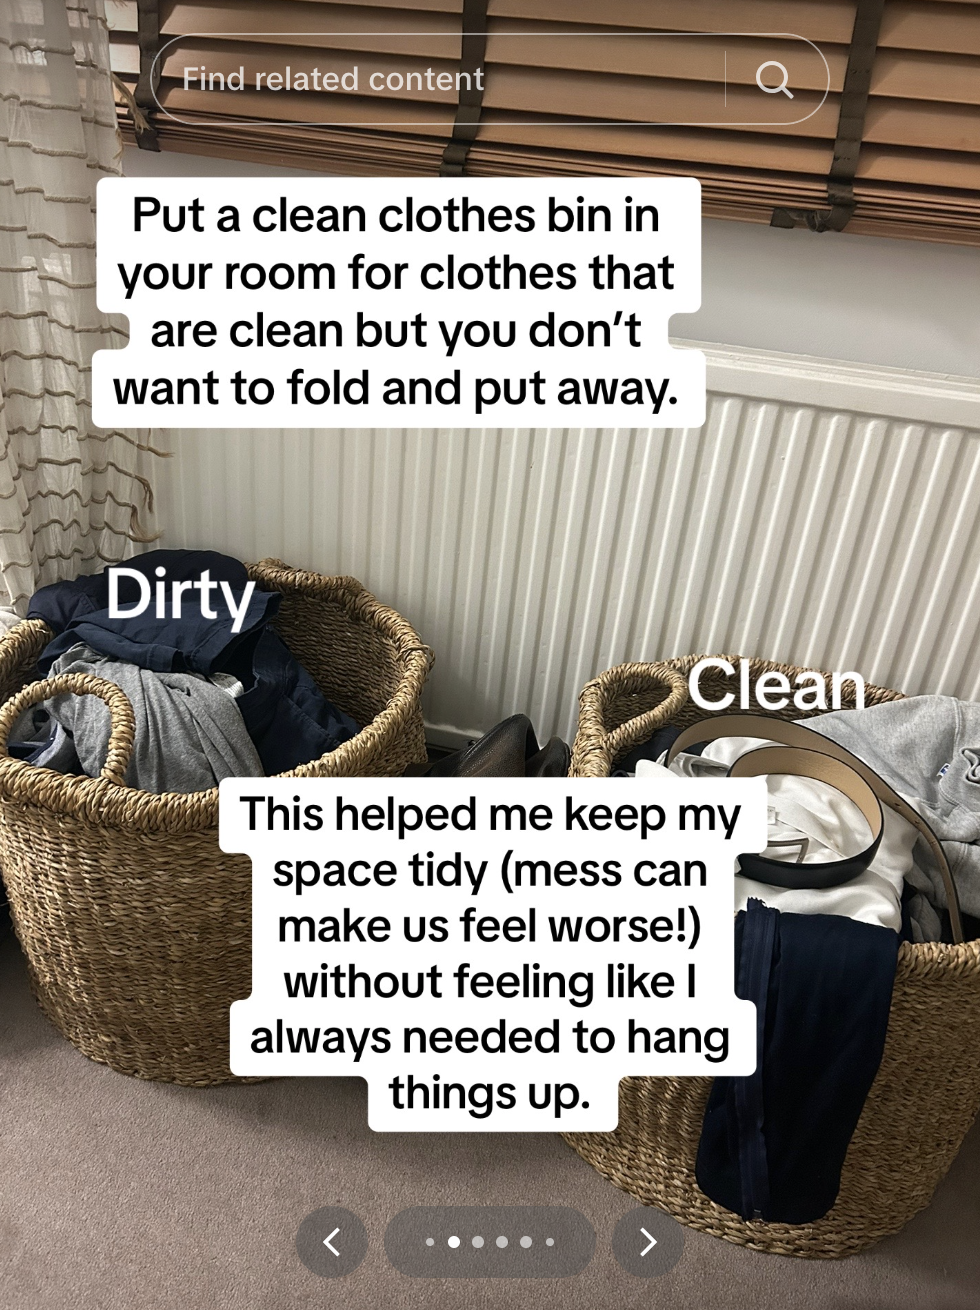 a bin of clean and dirty laundry